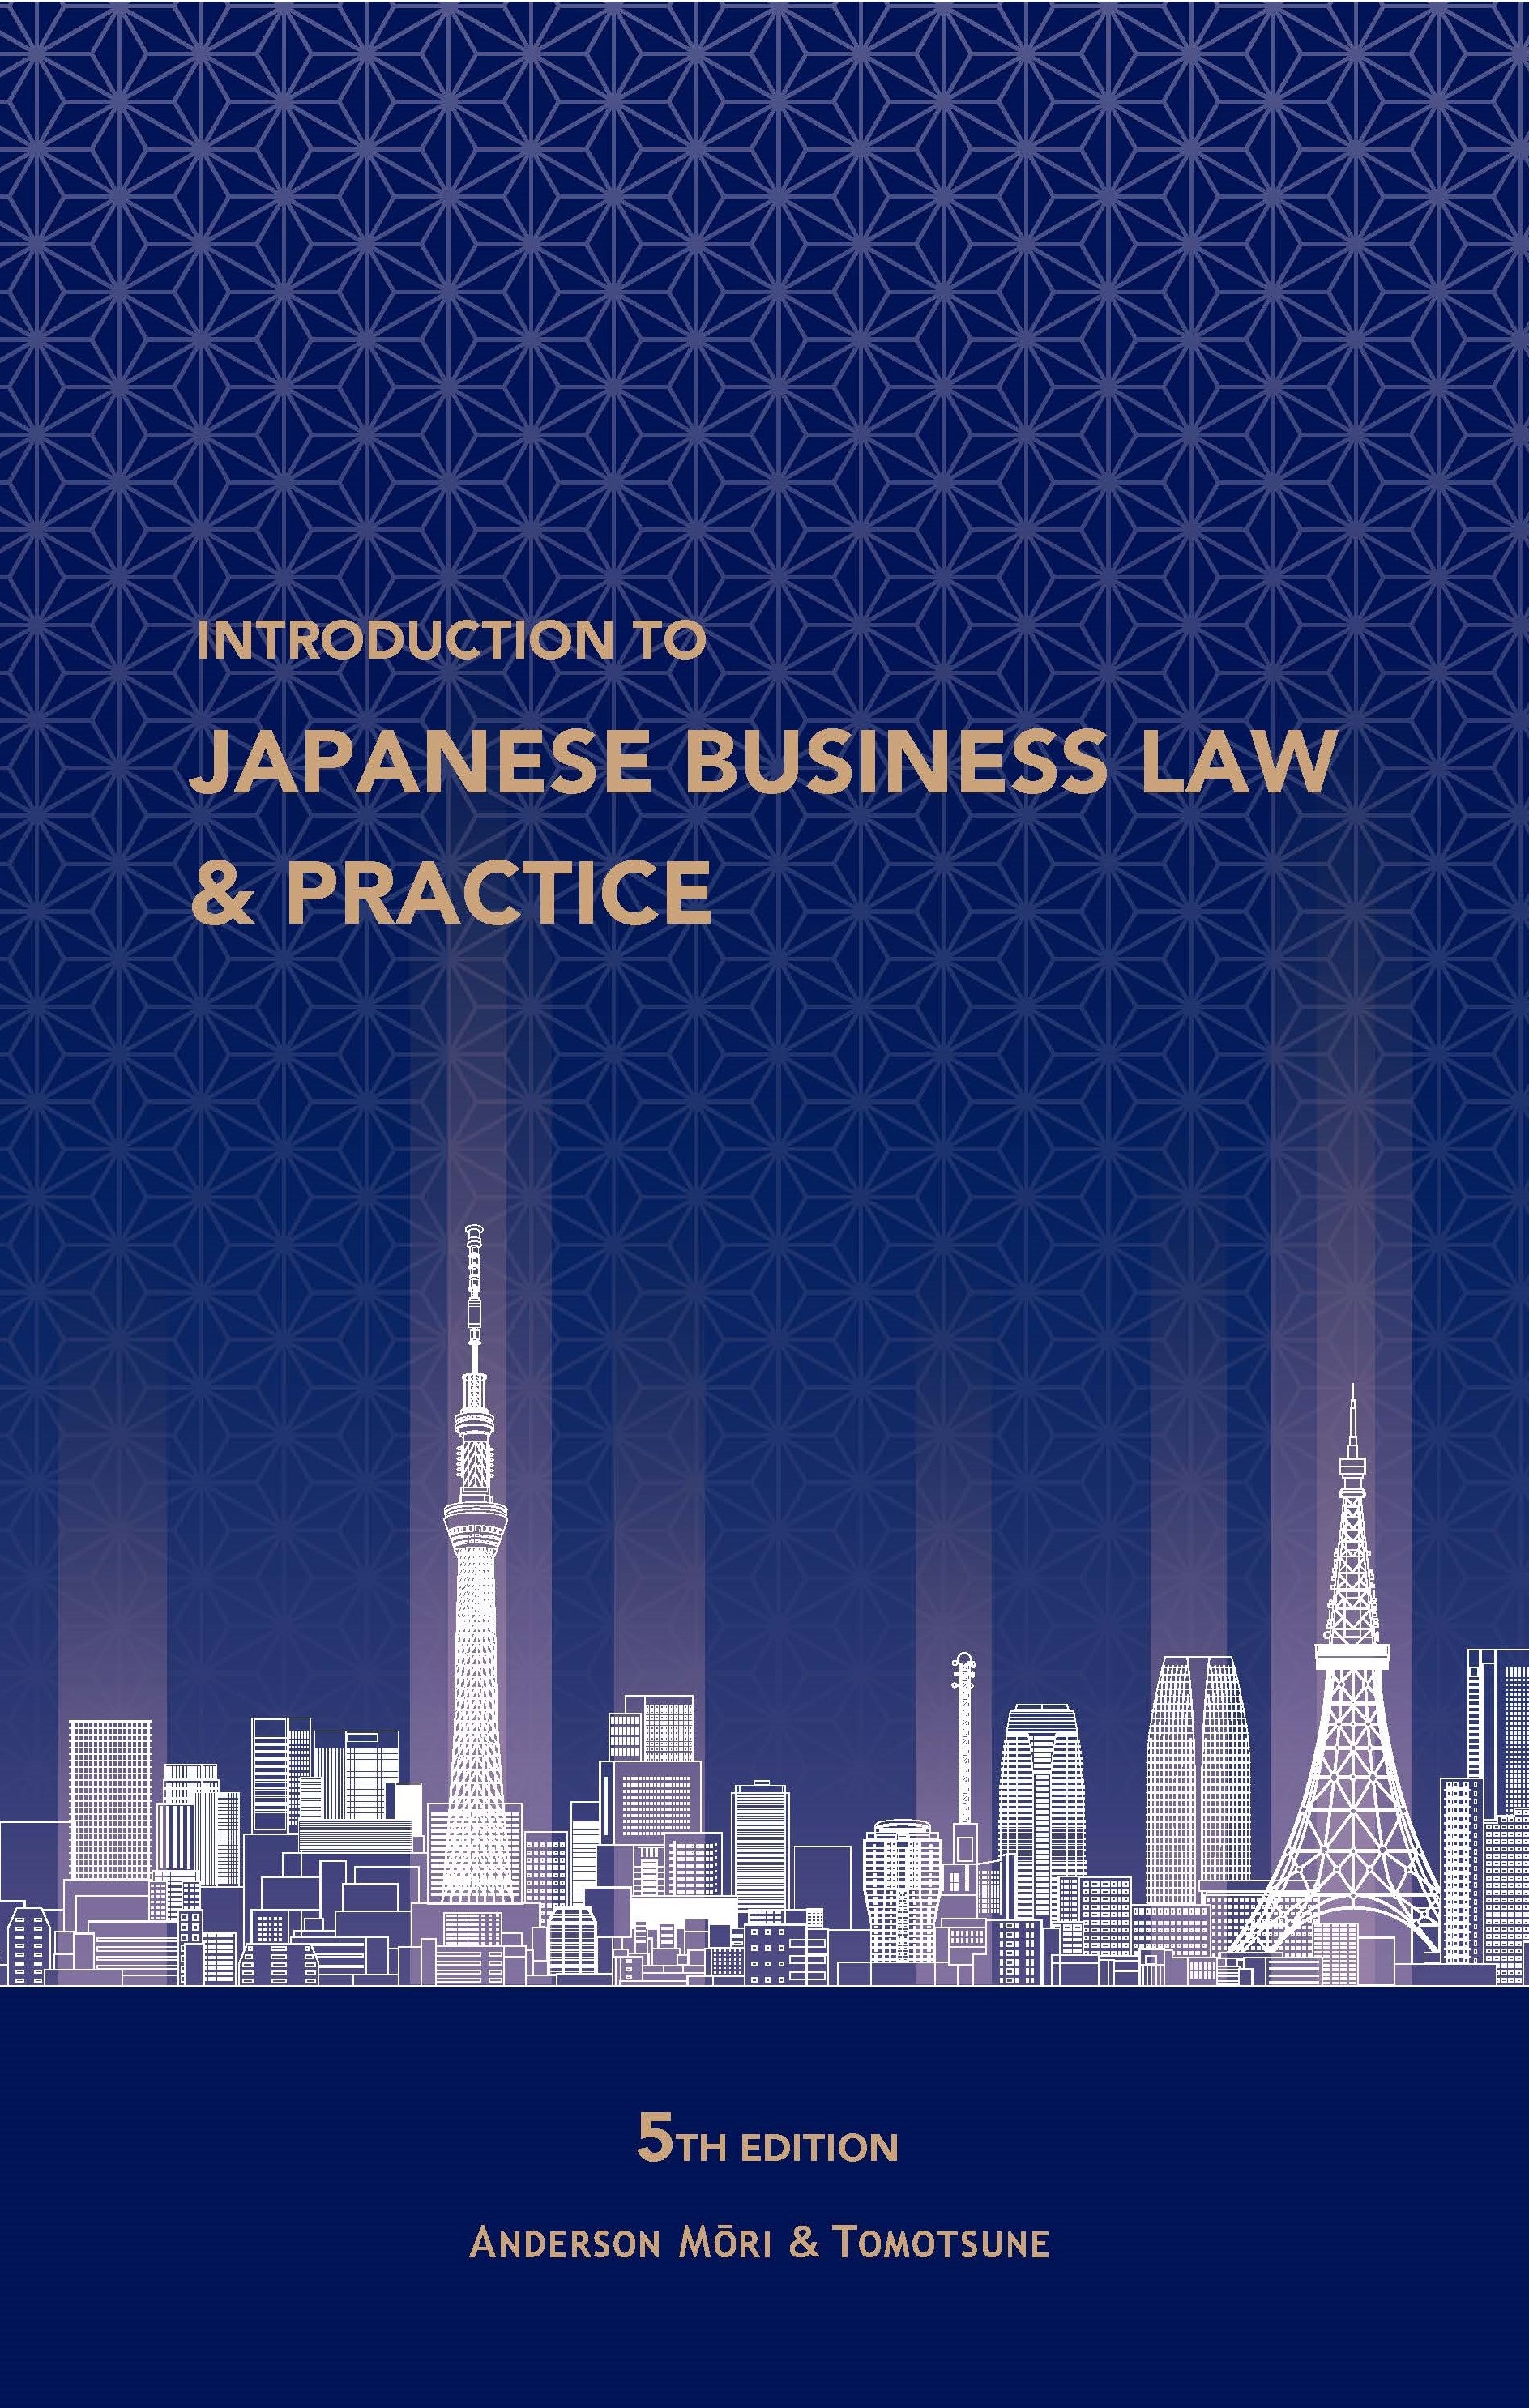 Introduction to Japanese Business Law & Practice FIFTH EDITION